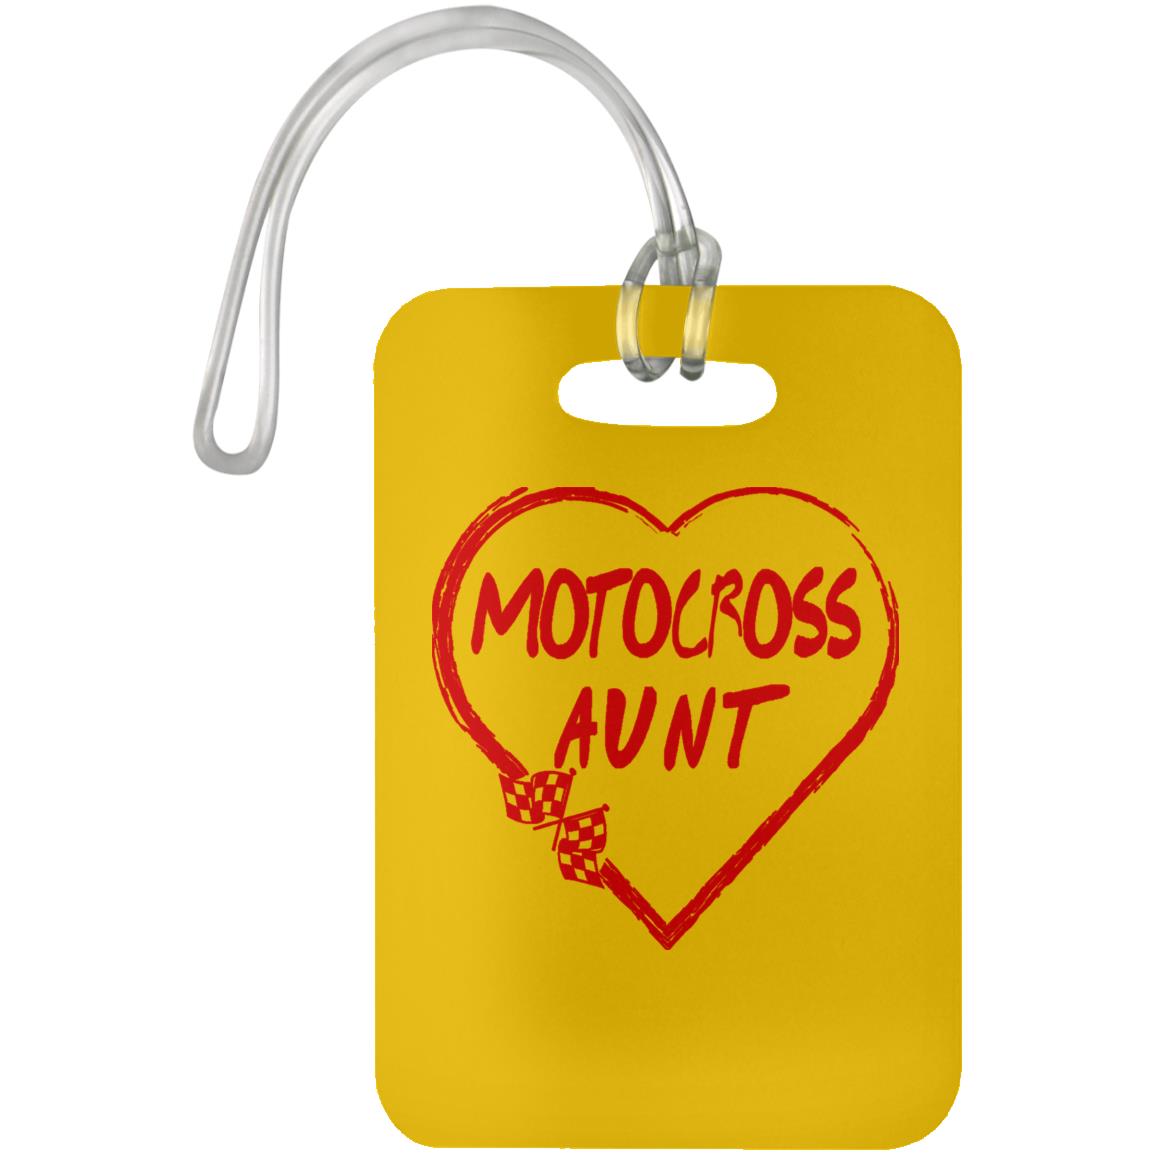 Motocross Aunt Heart Luggage Bag Tag